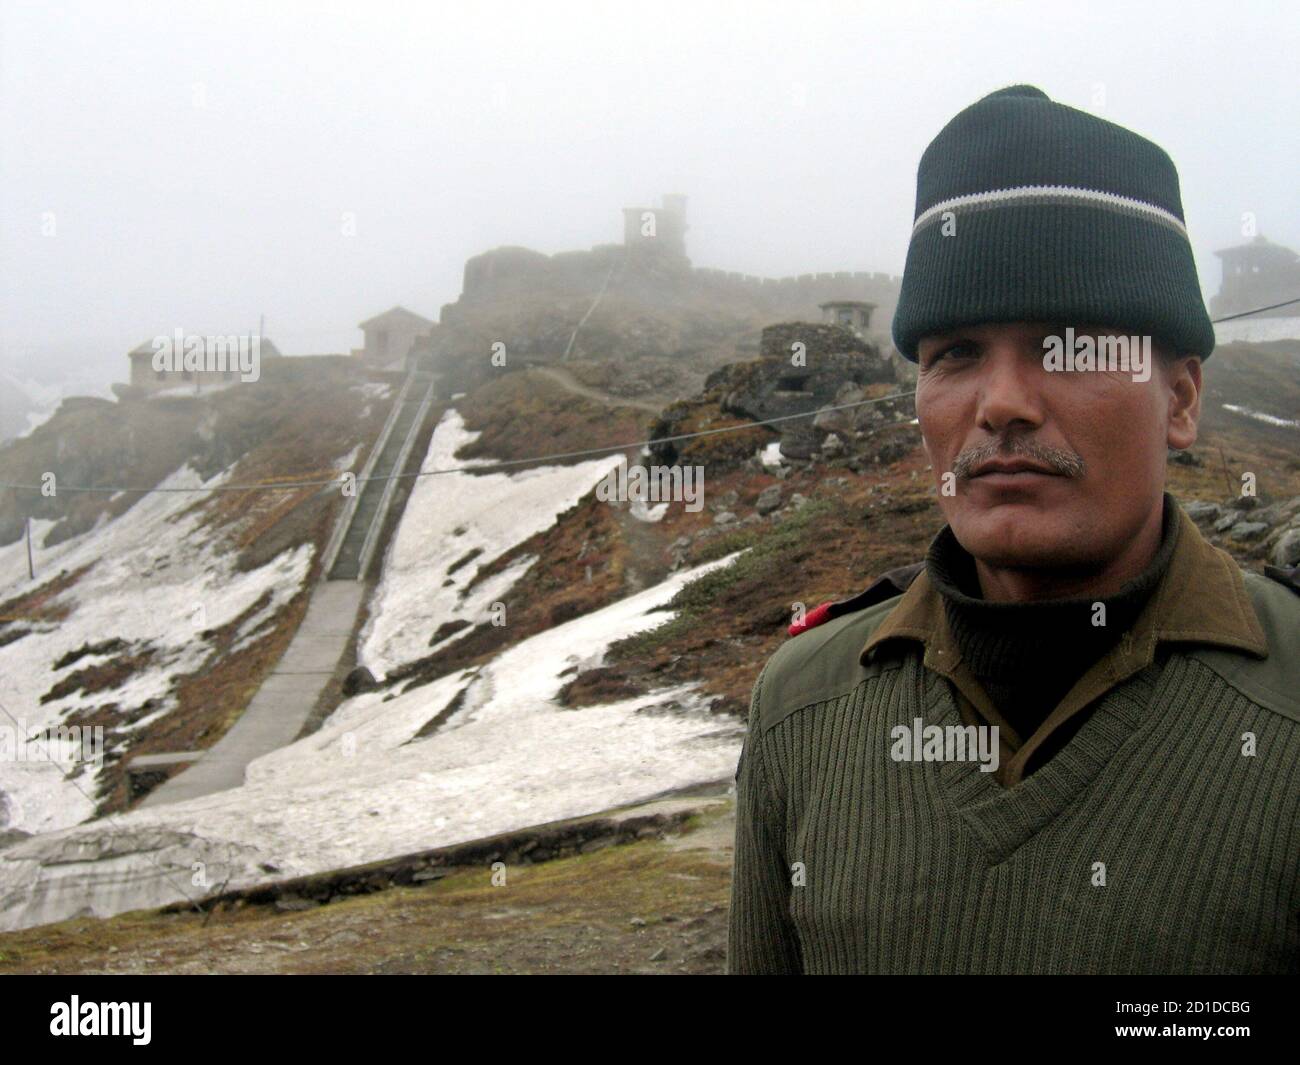 An Indian soldier stands at the 4,310 metre high Nathu-la pass on the country's north-eastern border with China in this May 29, 2006 file photo. Just a few yards away bulldozers on both sides of the frontline are building not fortifications but a road, to connect India and China and reopen a historic trade route. New Delhi and Beijing plan to reopen the Nathu-la pass in June after more than 40 years, a potent symbol of rapprochement between Asian giants who fought a Himalayan war in 1962. Picture taken May 29, 2006.  To match feature INDIA CHINA TRADE.  REUTERS/Simon Denyer  (INDIA) Stock Photo